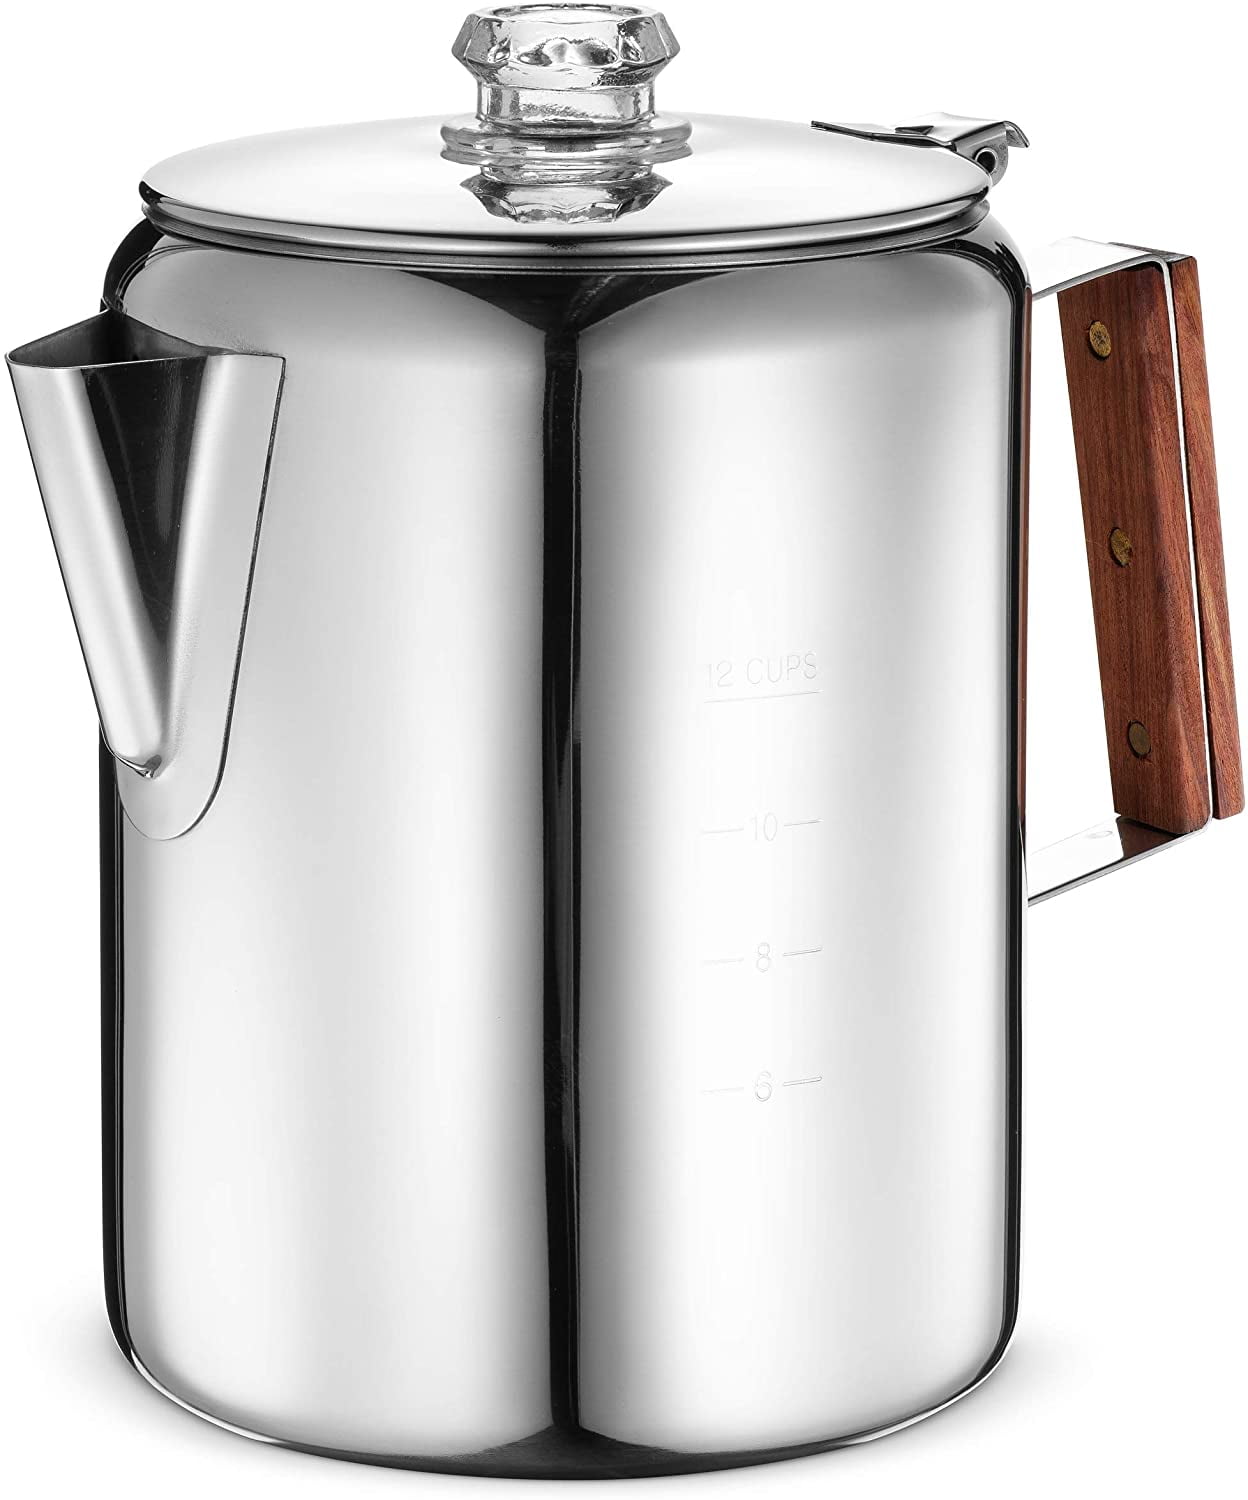 Euro Cuisine PER12 Electric Percolator 12 Cup Stainless Steel Coffee Pot  Maker - Copper Finish